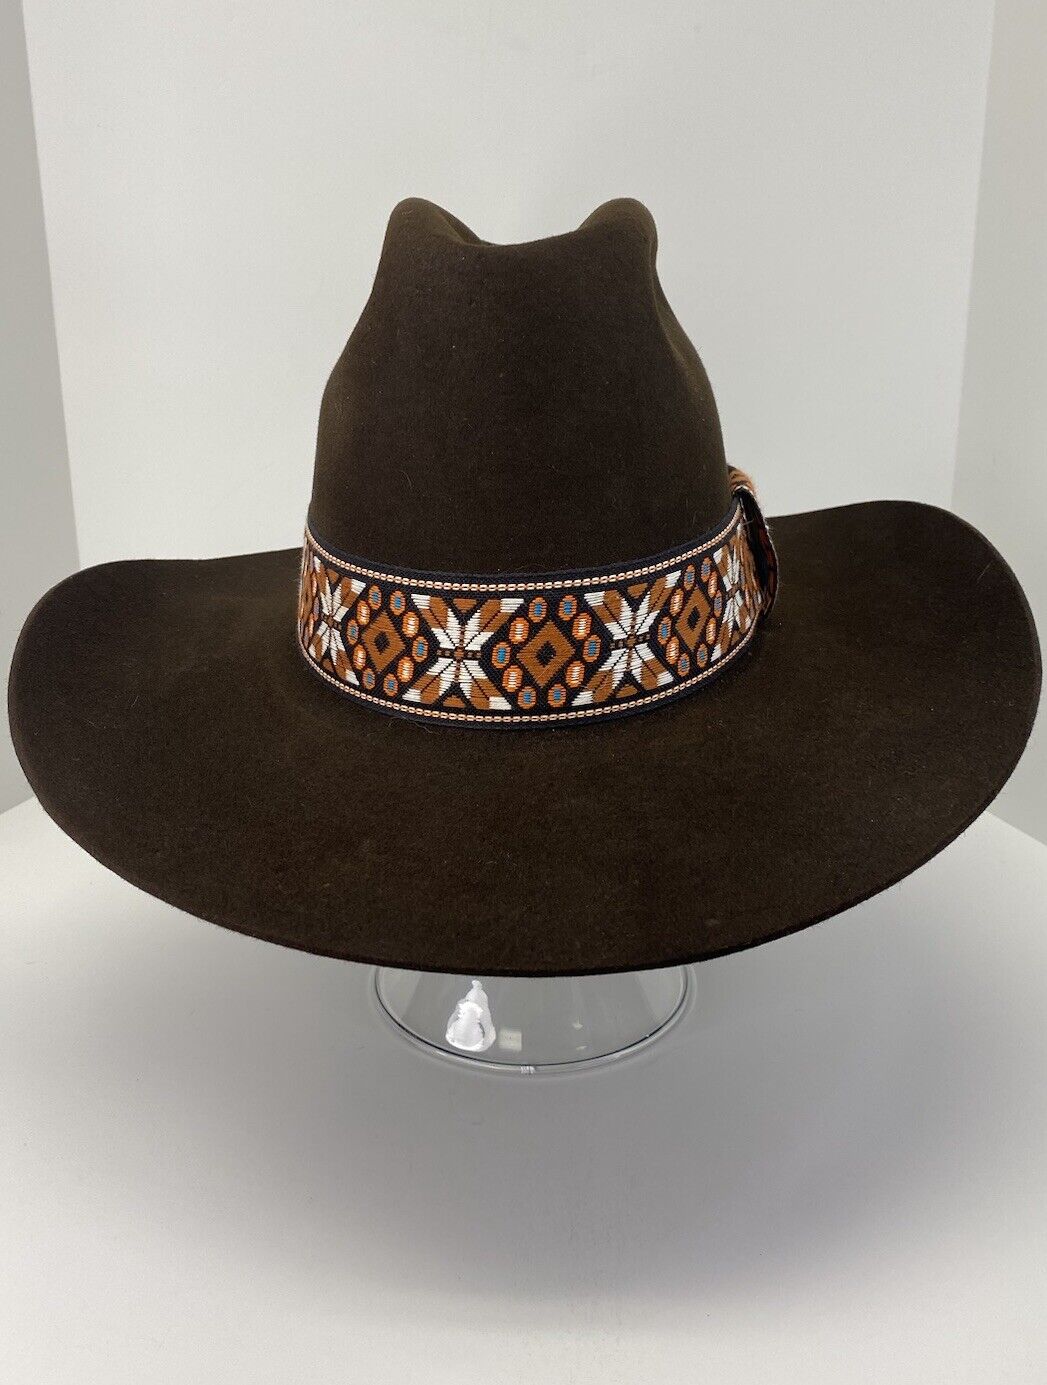 Vintage John Stetson Brown 4X Beaver Cowboy Hat w/ Embroidered Hat Band - 7 1/4